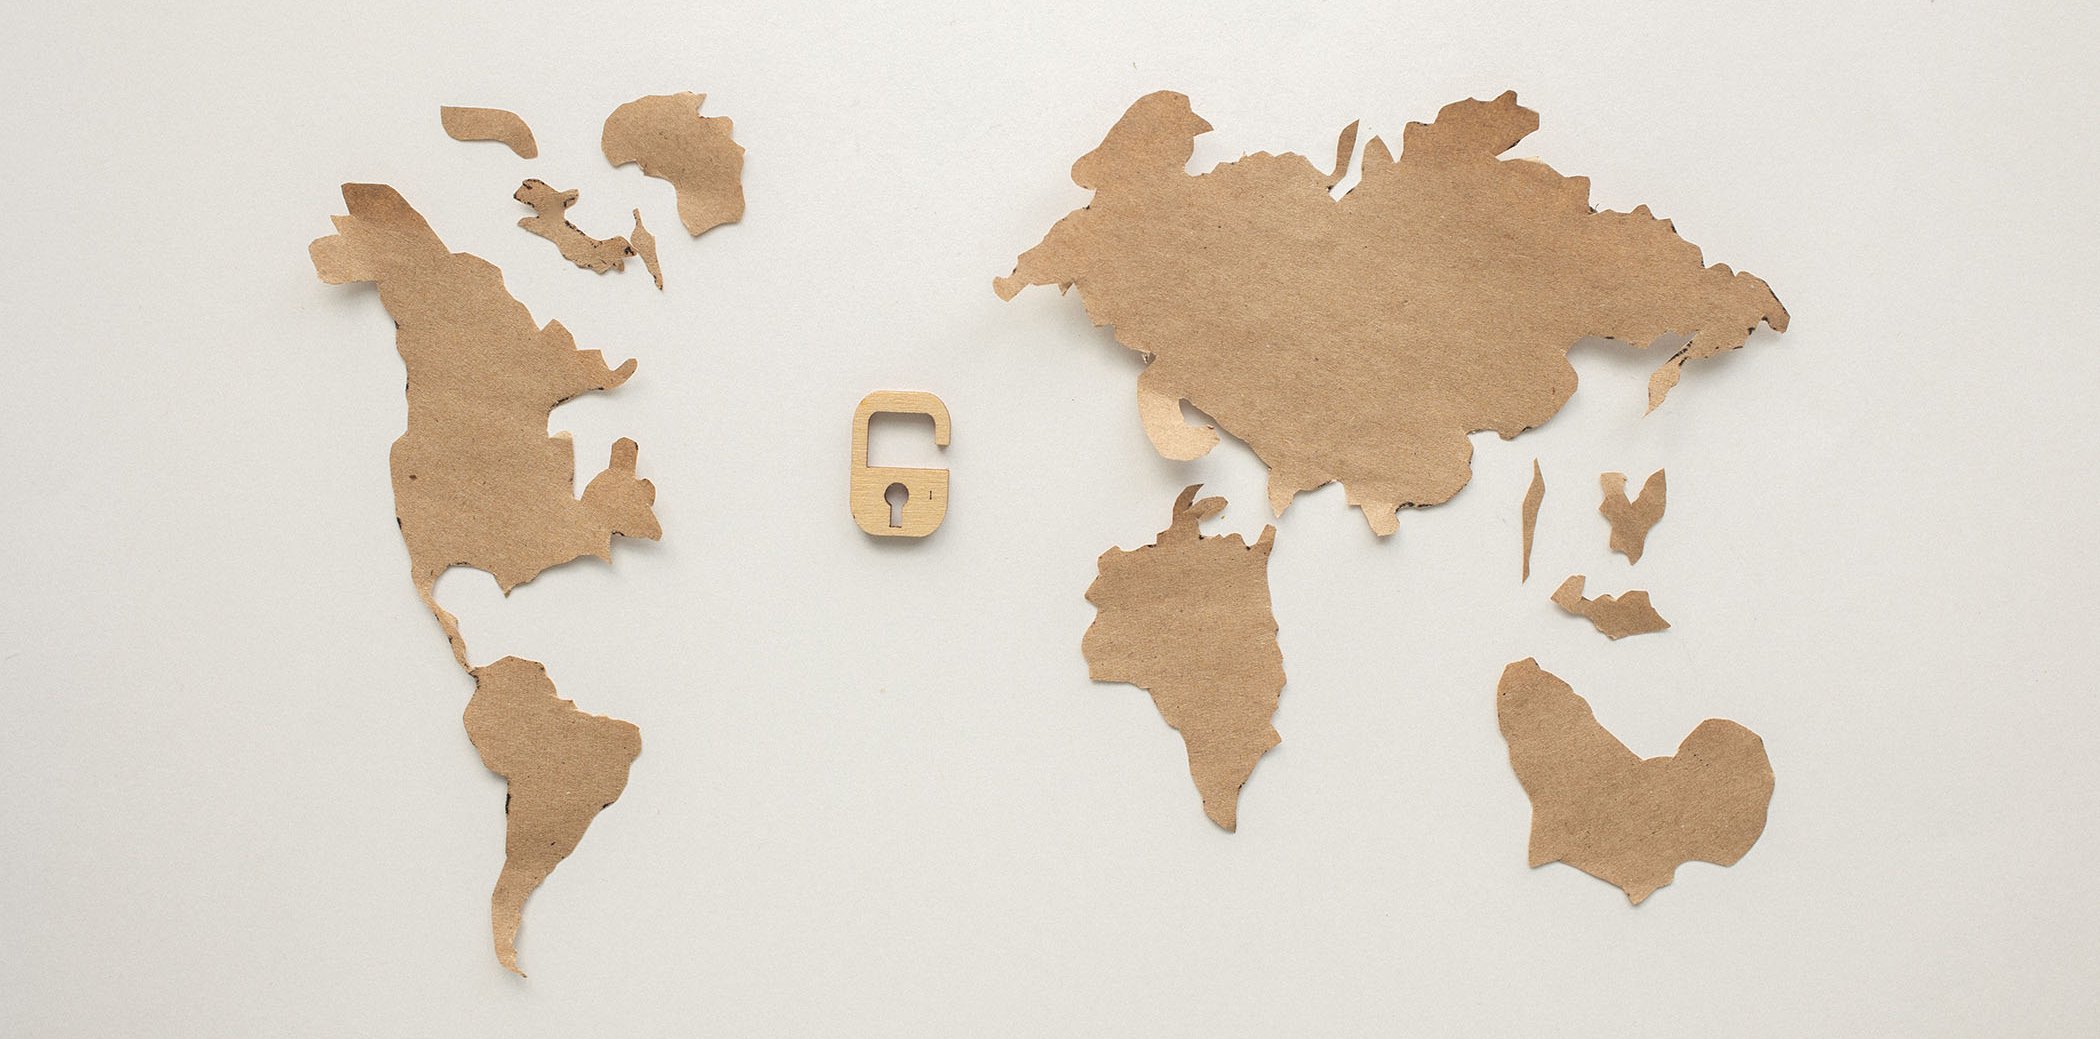 A world map with an open padlock in the middle, both made of cardboard